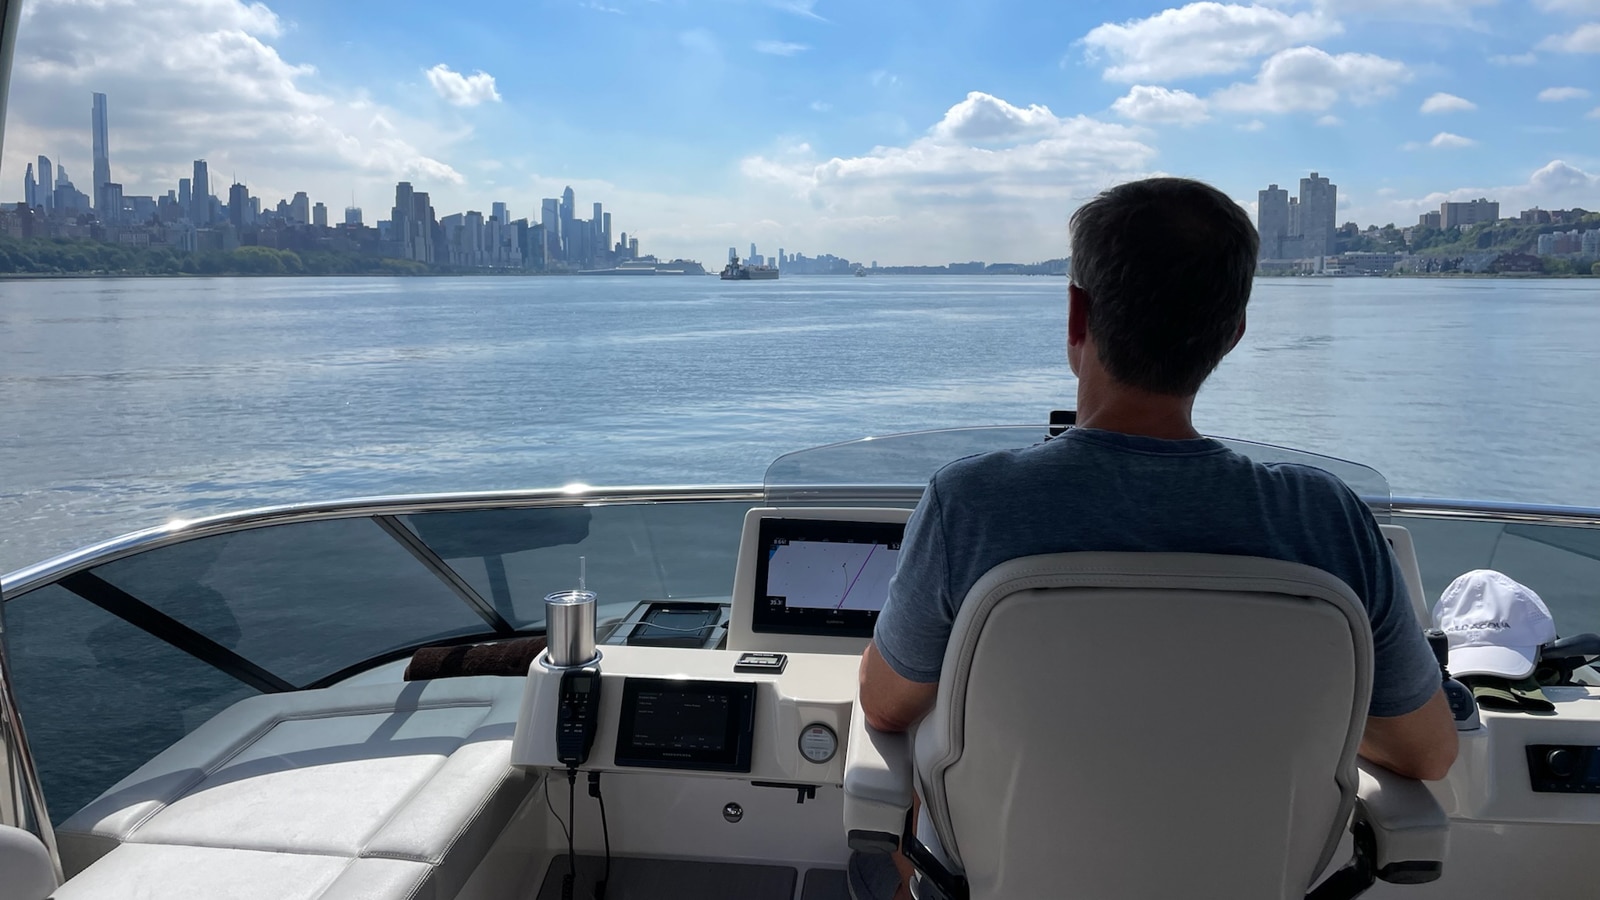 The long distance cruise of Absolute Sull'Acqua NY